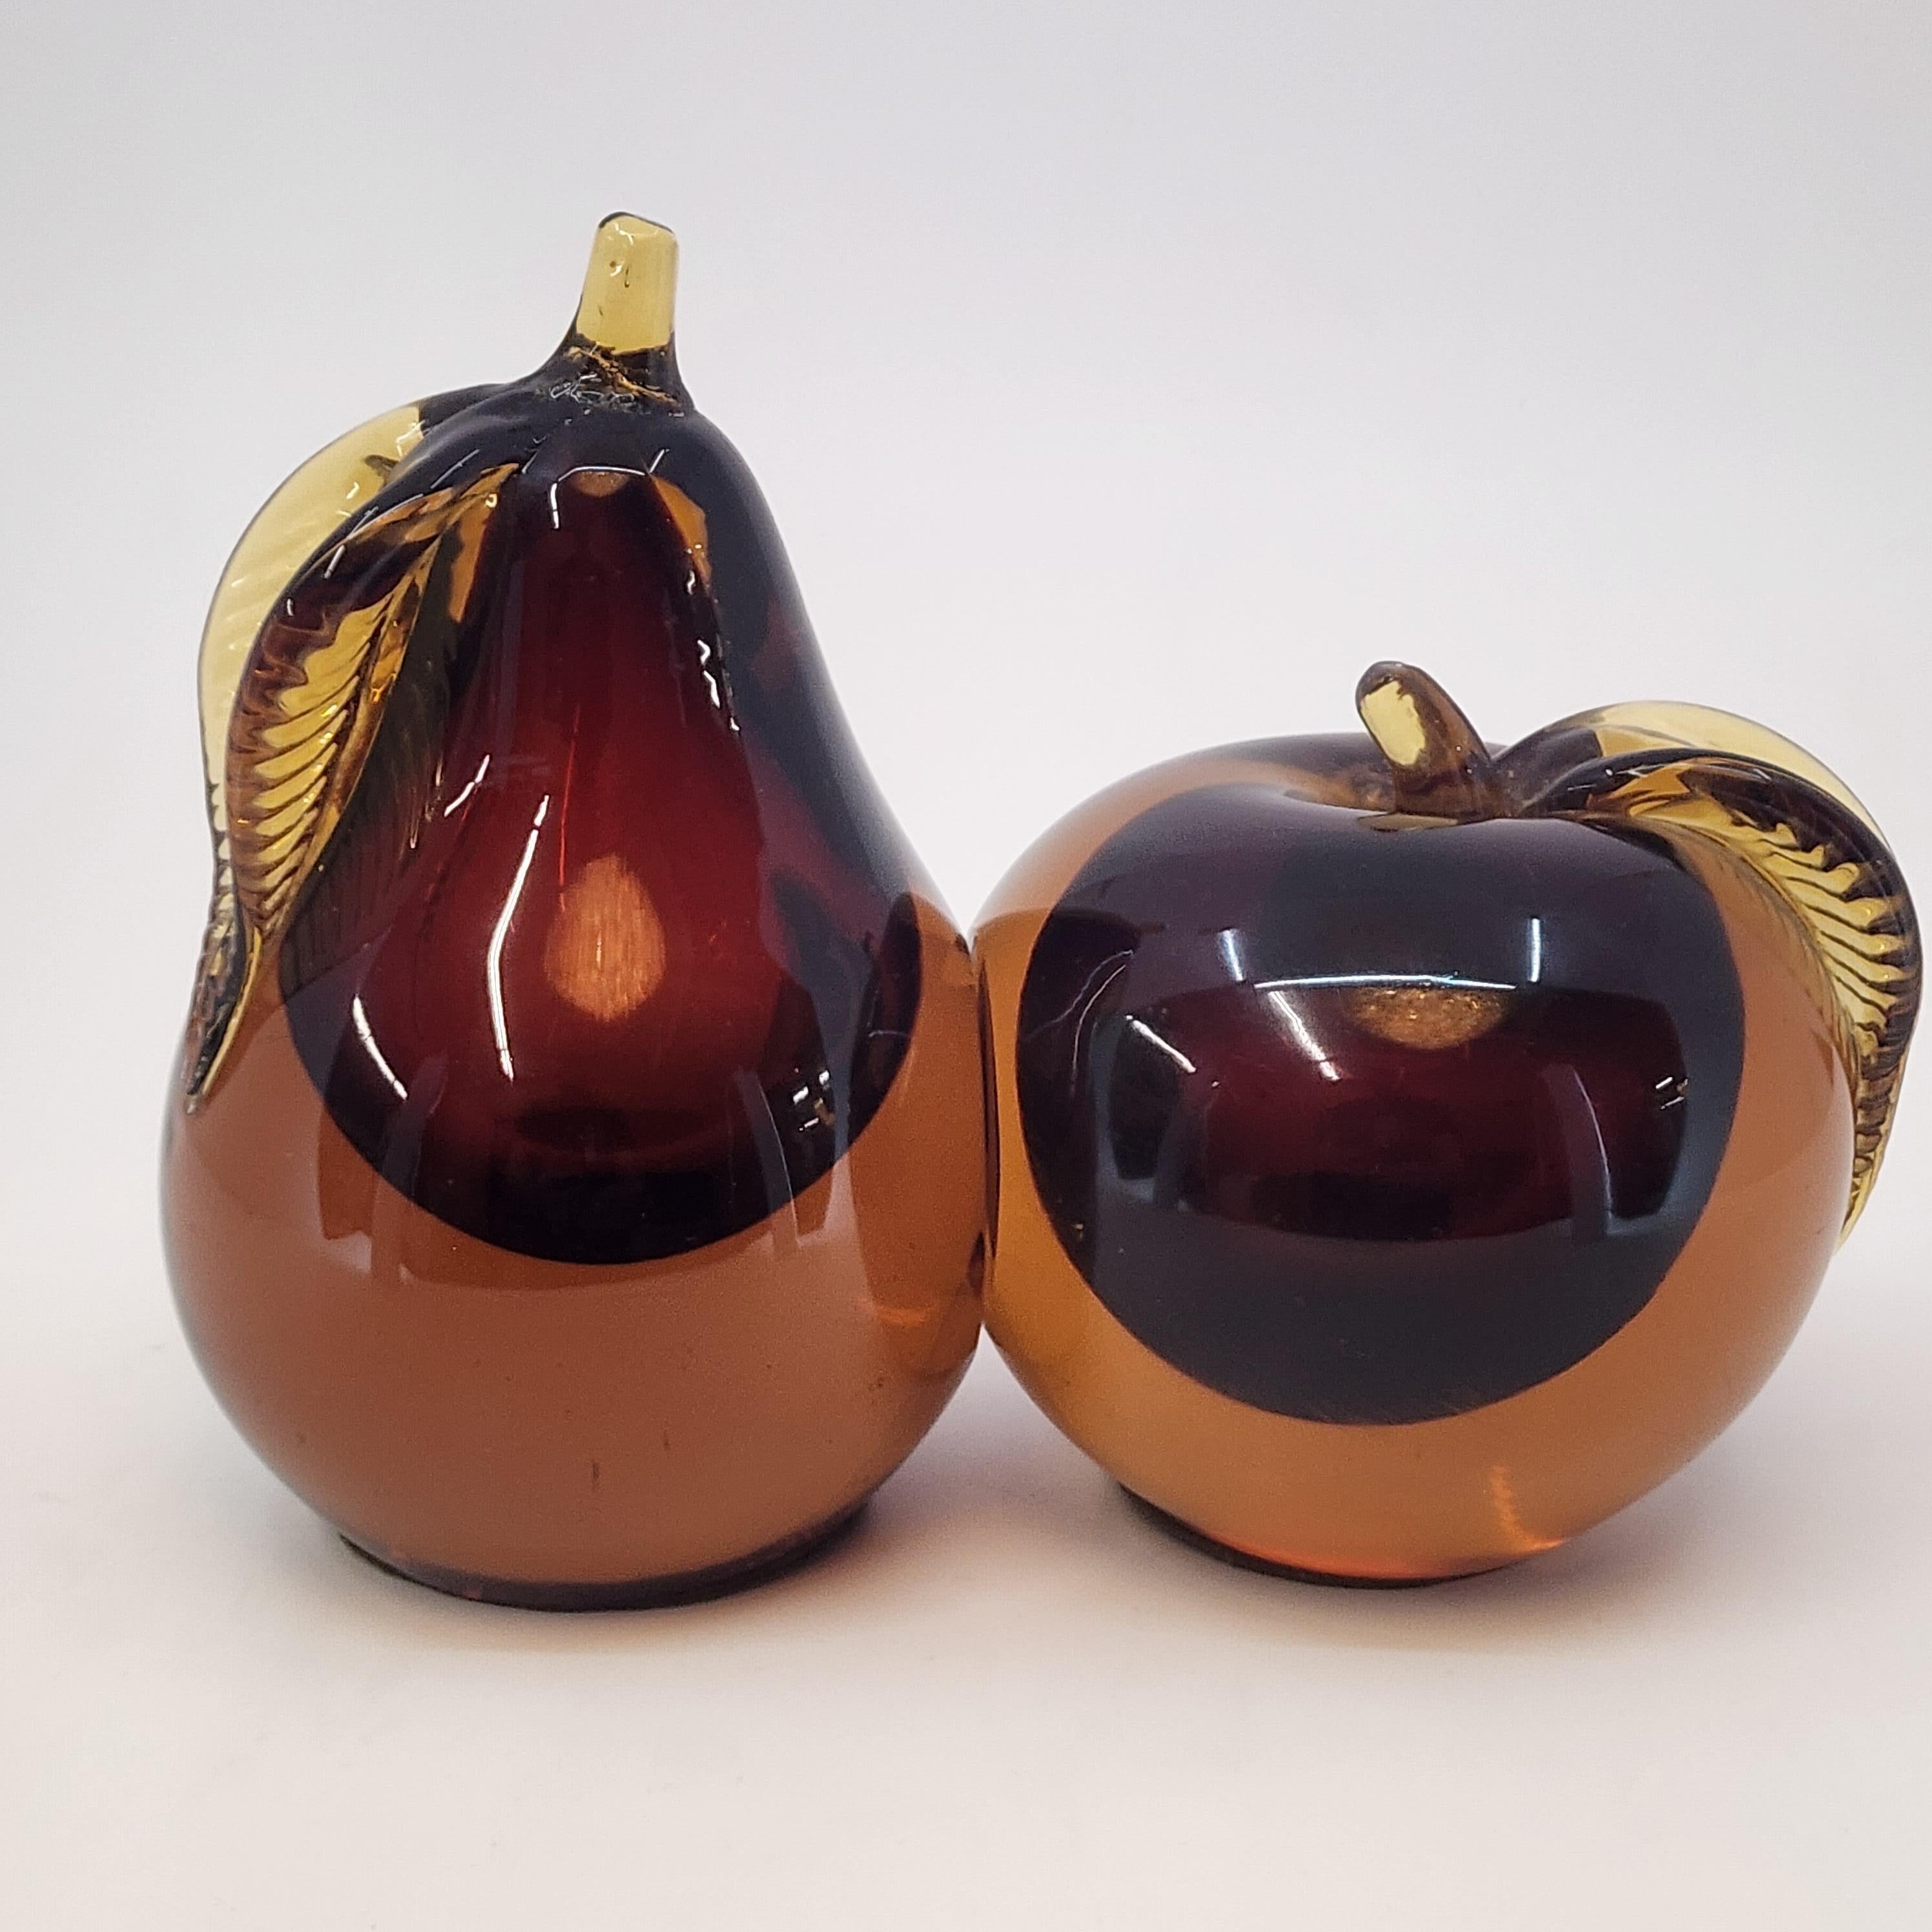 Hand-Crafted Pair Of Murano Apple and Pear Bookends by Barbini